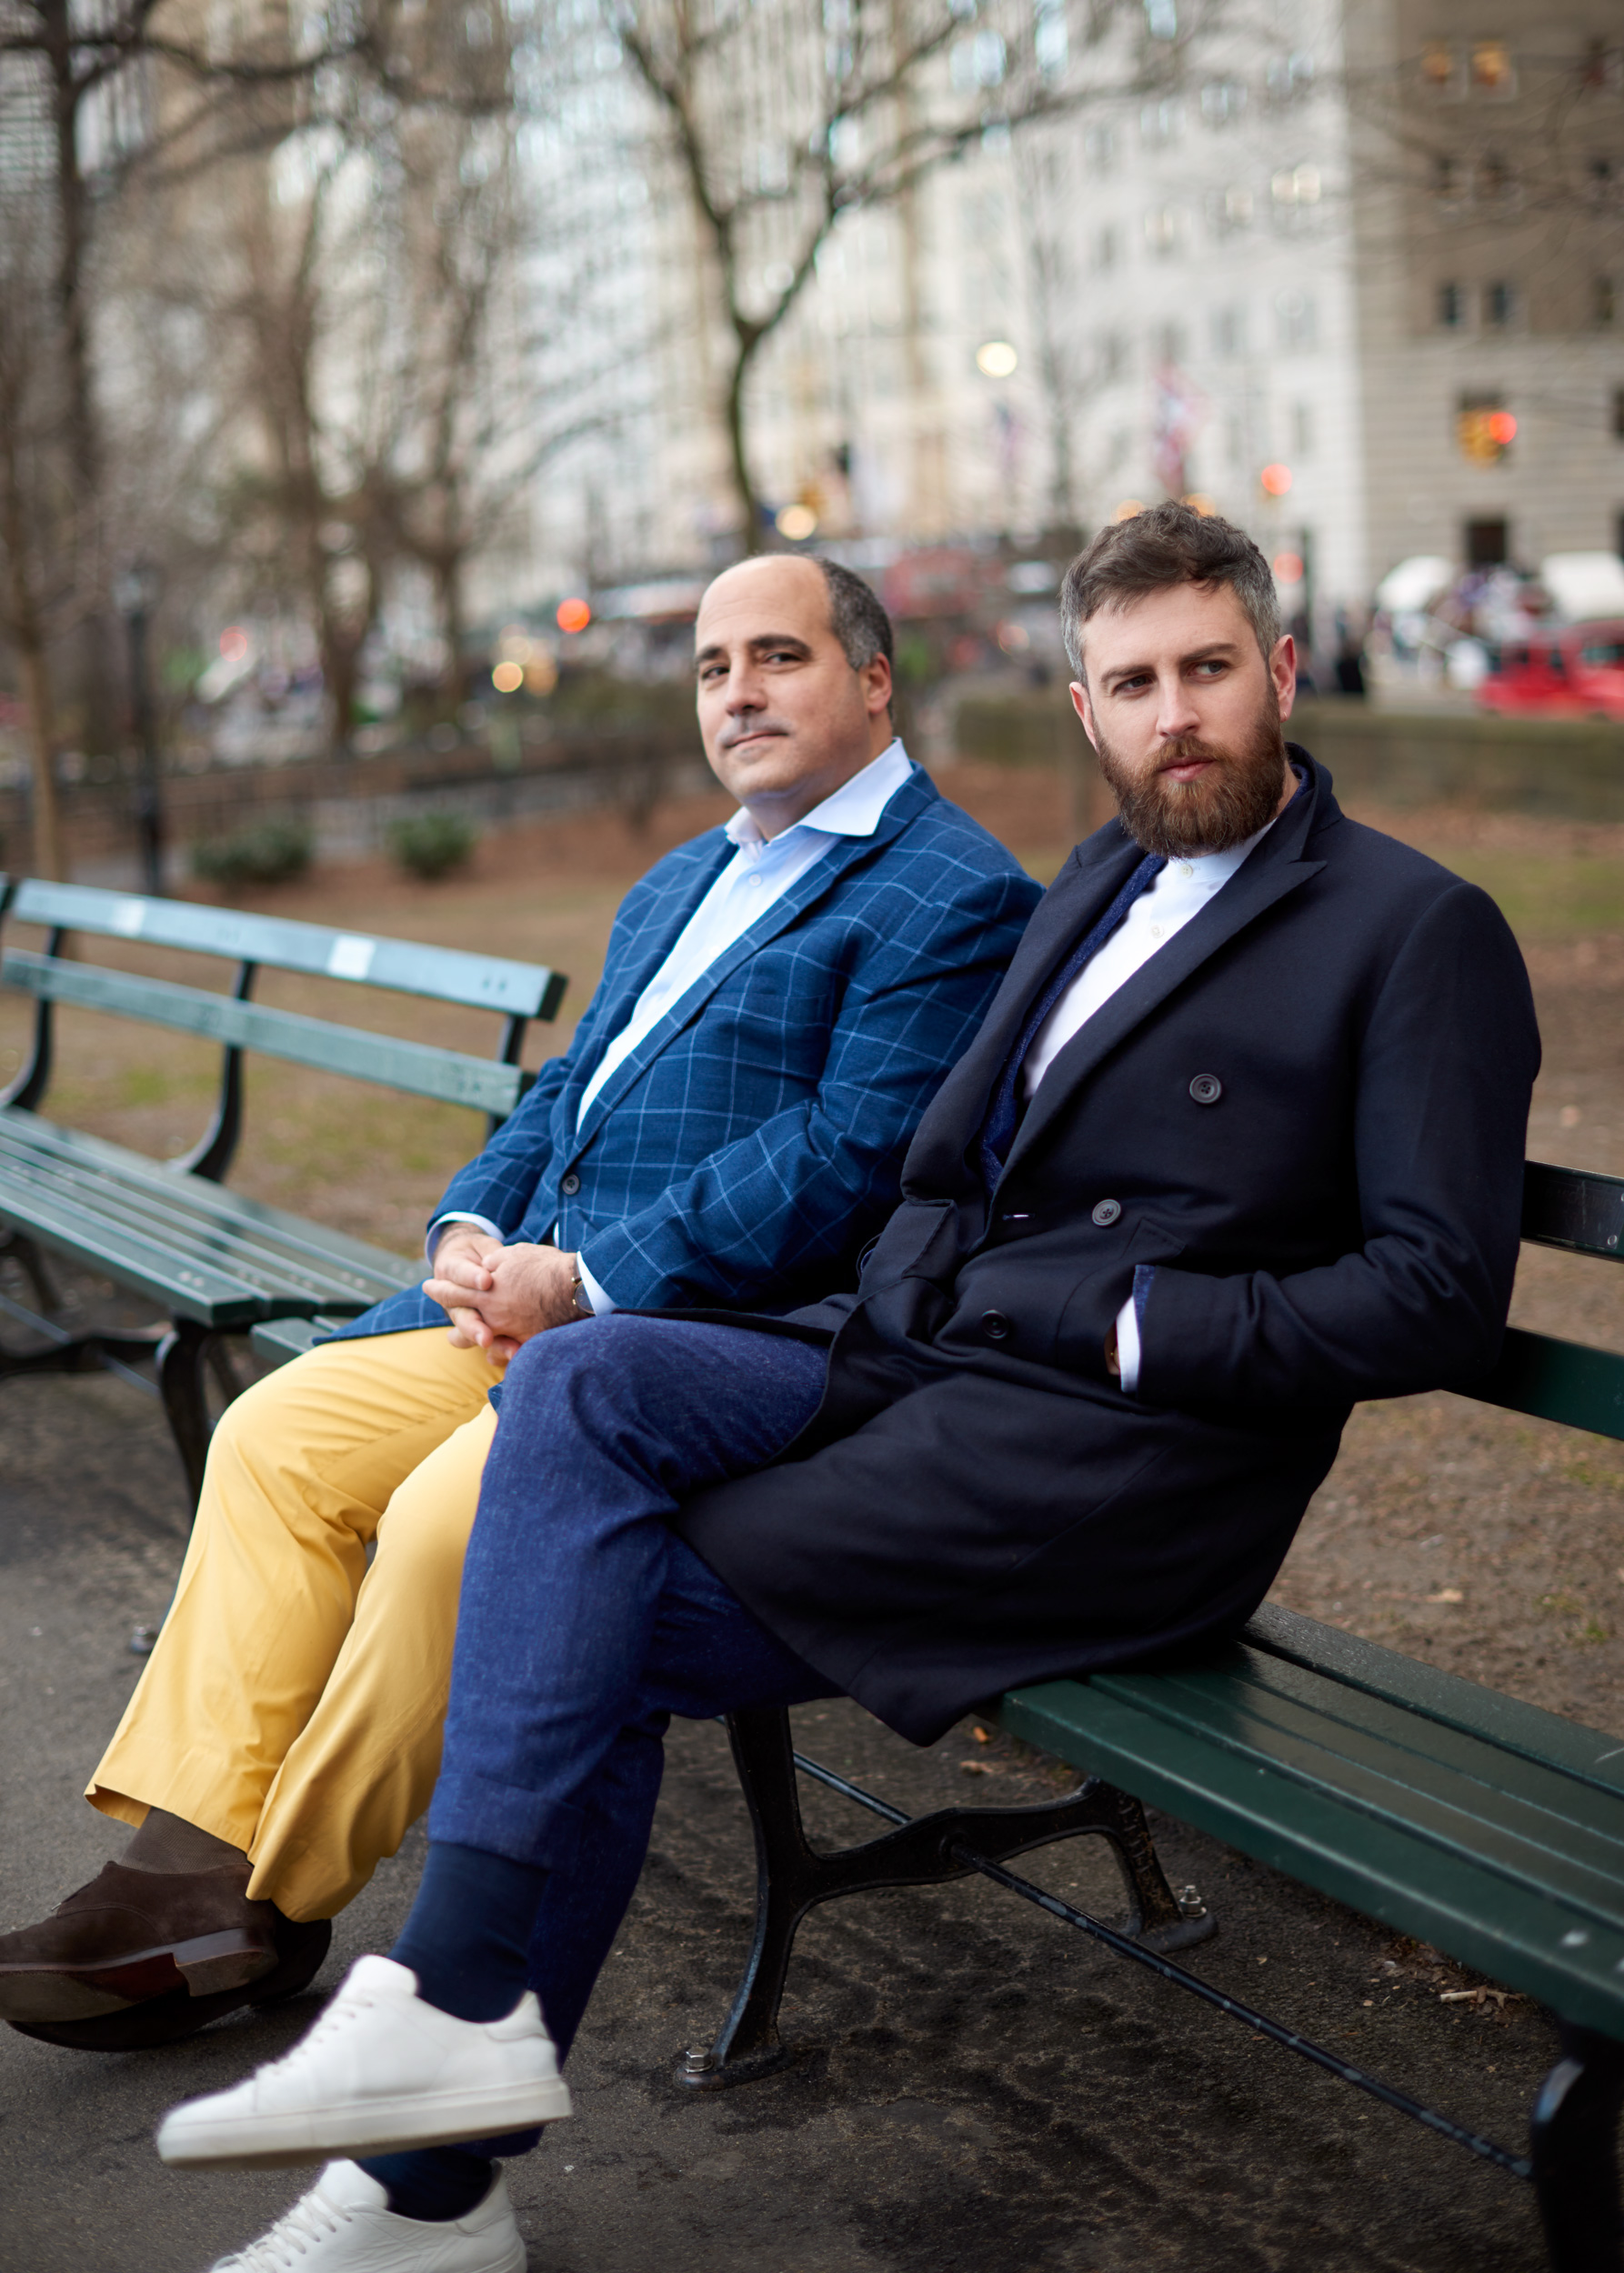 PORTRAIT OF JOHN AND CUSTOMER IN CENTRAL PARK FOR CAD AND THE DANDY